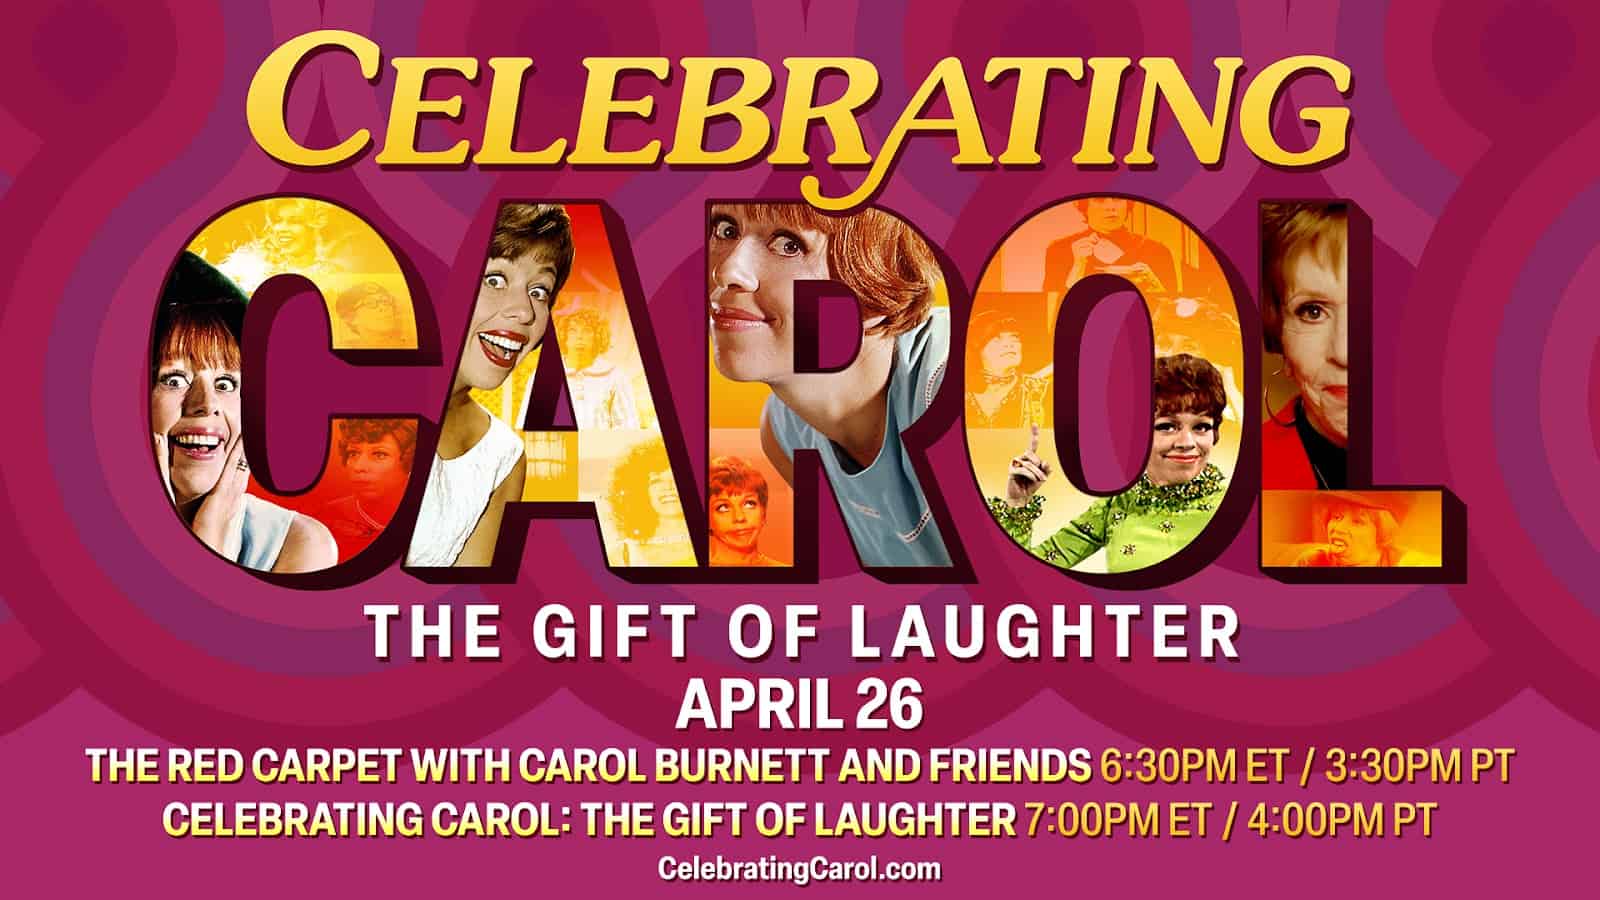 Shout! Factory TV Honors Carol Burnett with Exclusive Streaming Event. Did you watch? 30